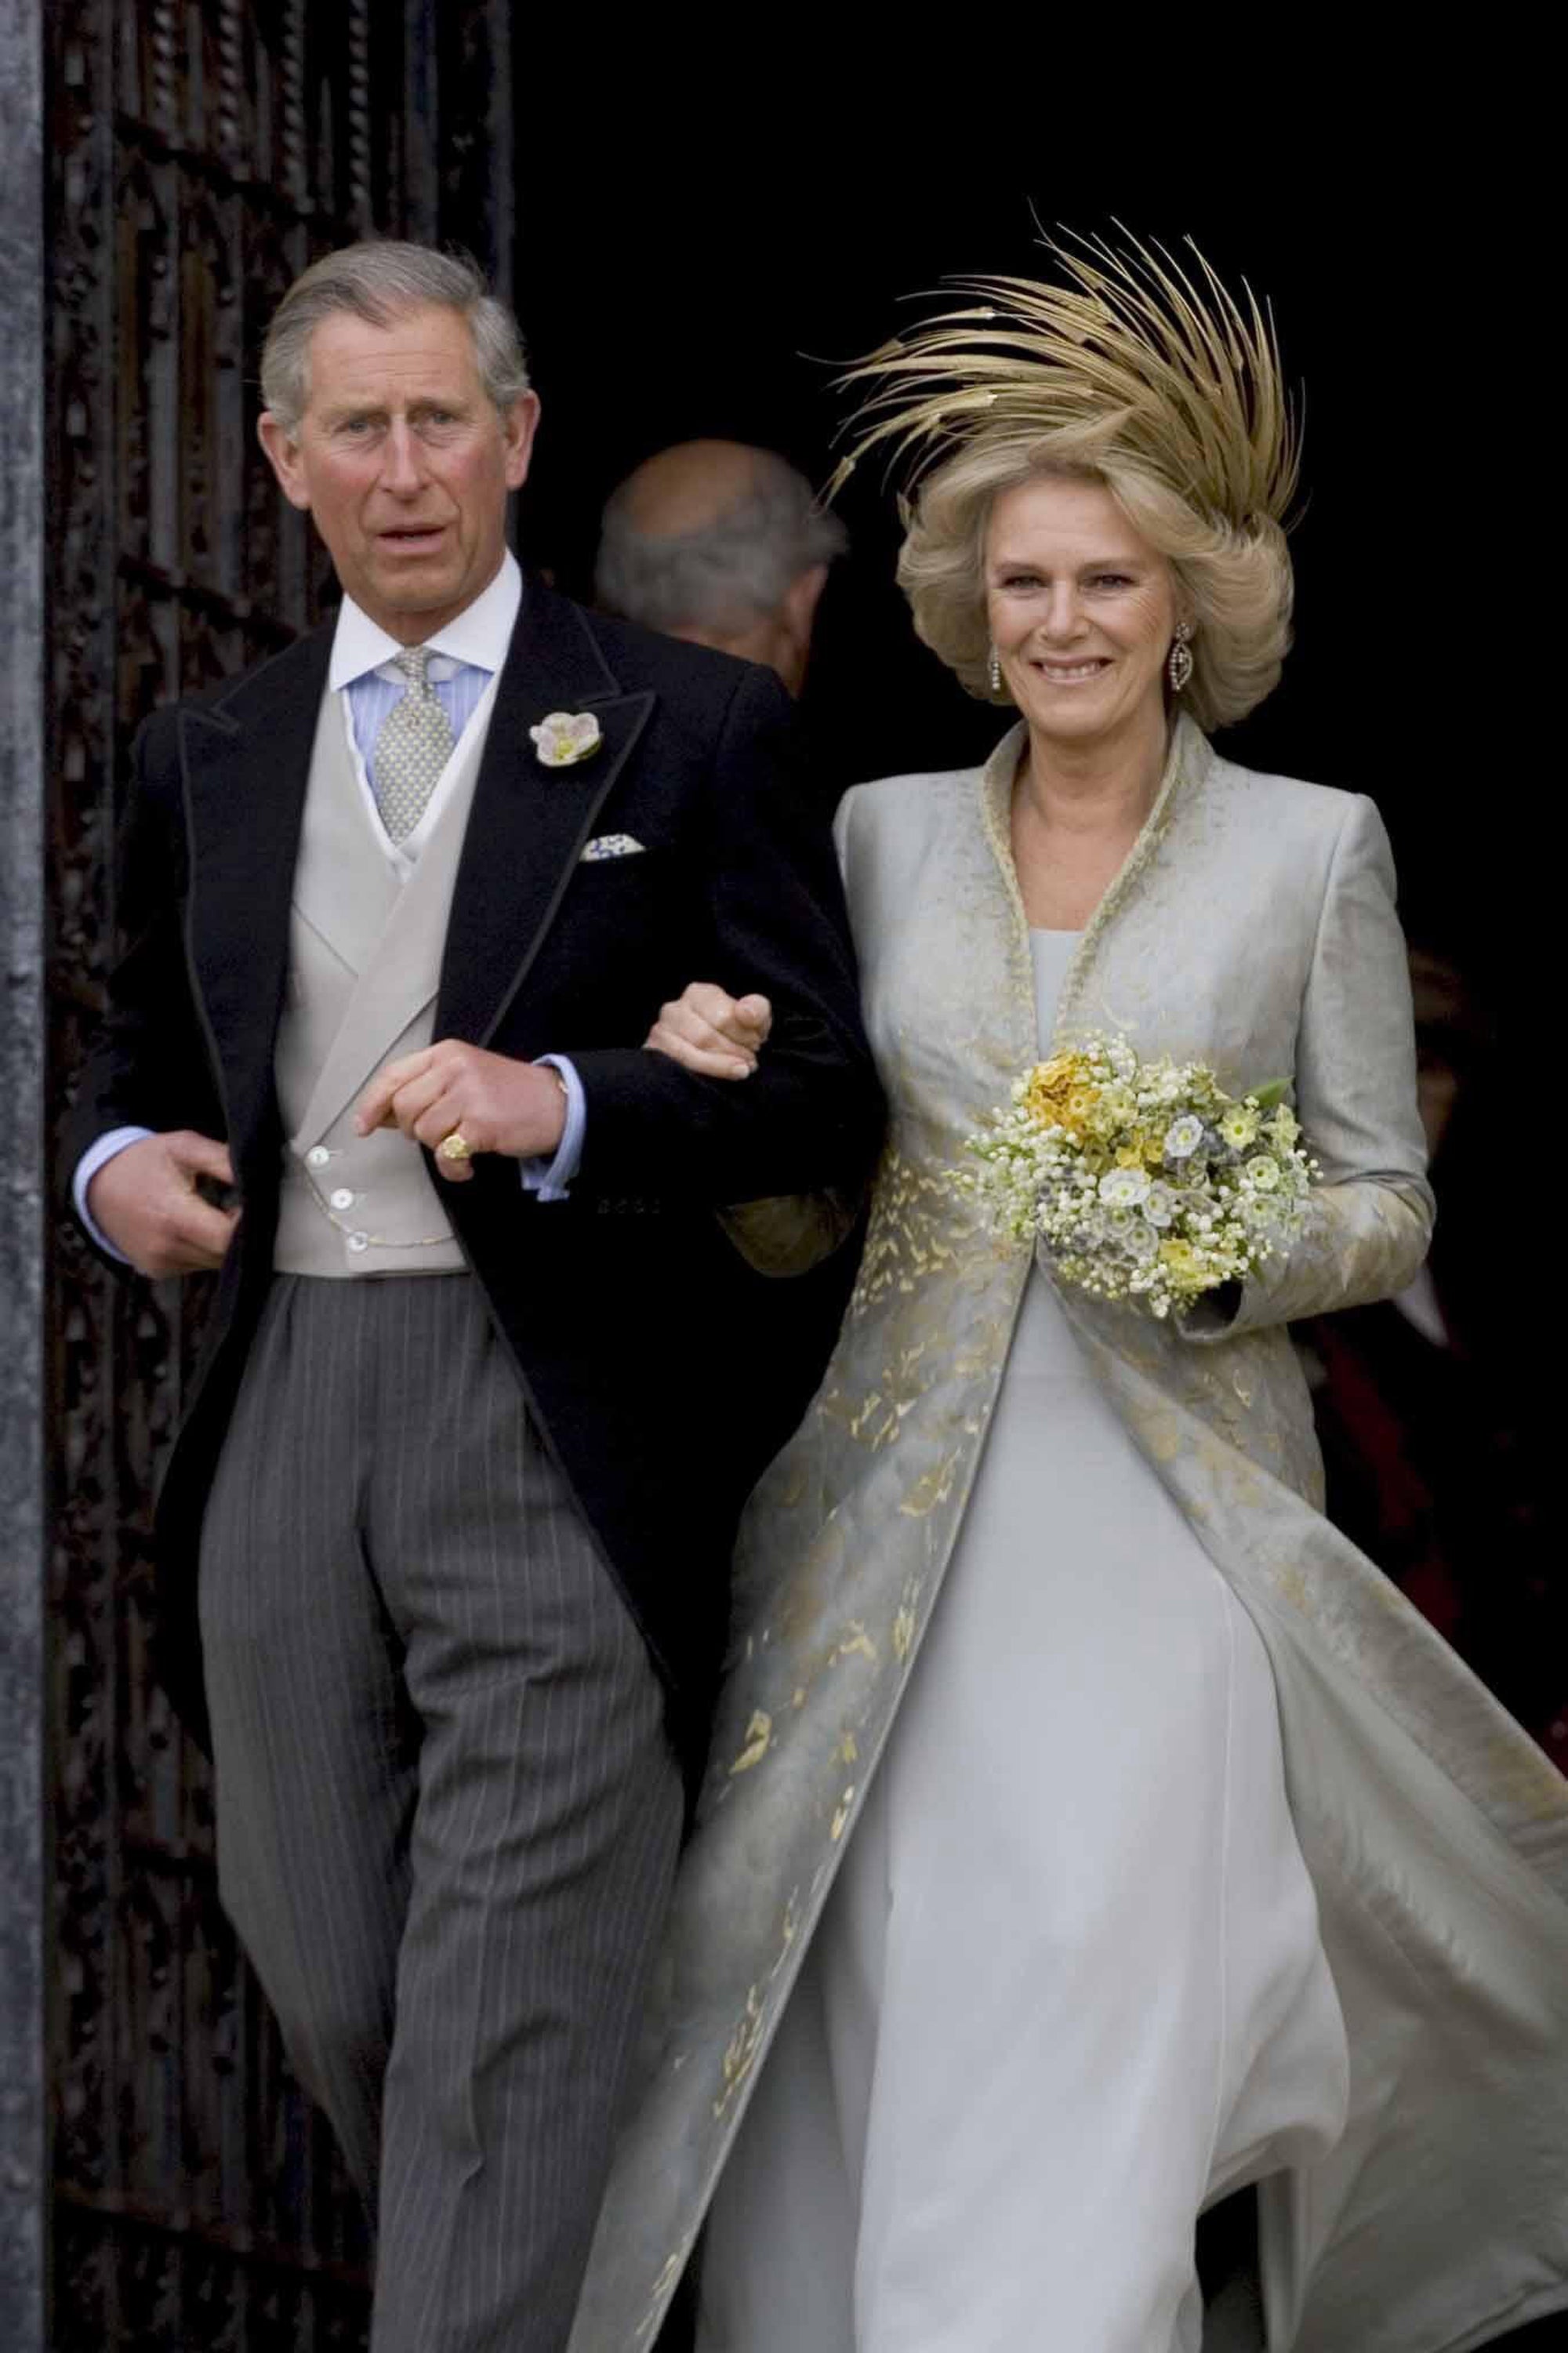 The Prince of Wales and his bride Camilla, Duchess of Cornwall leave St George’s Chapel in Windsor, following their wedding (Bob Collier/PA)